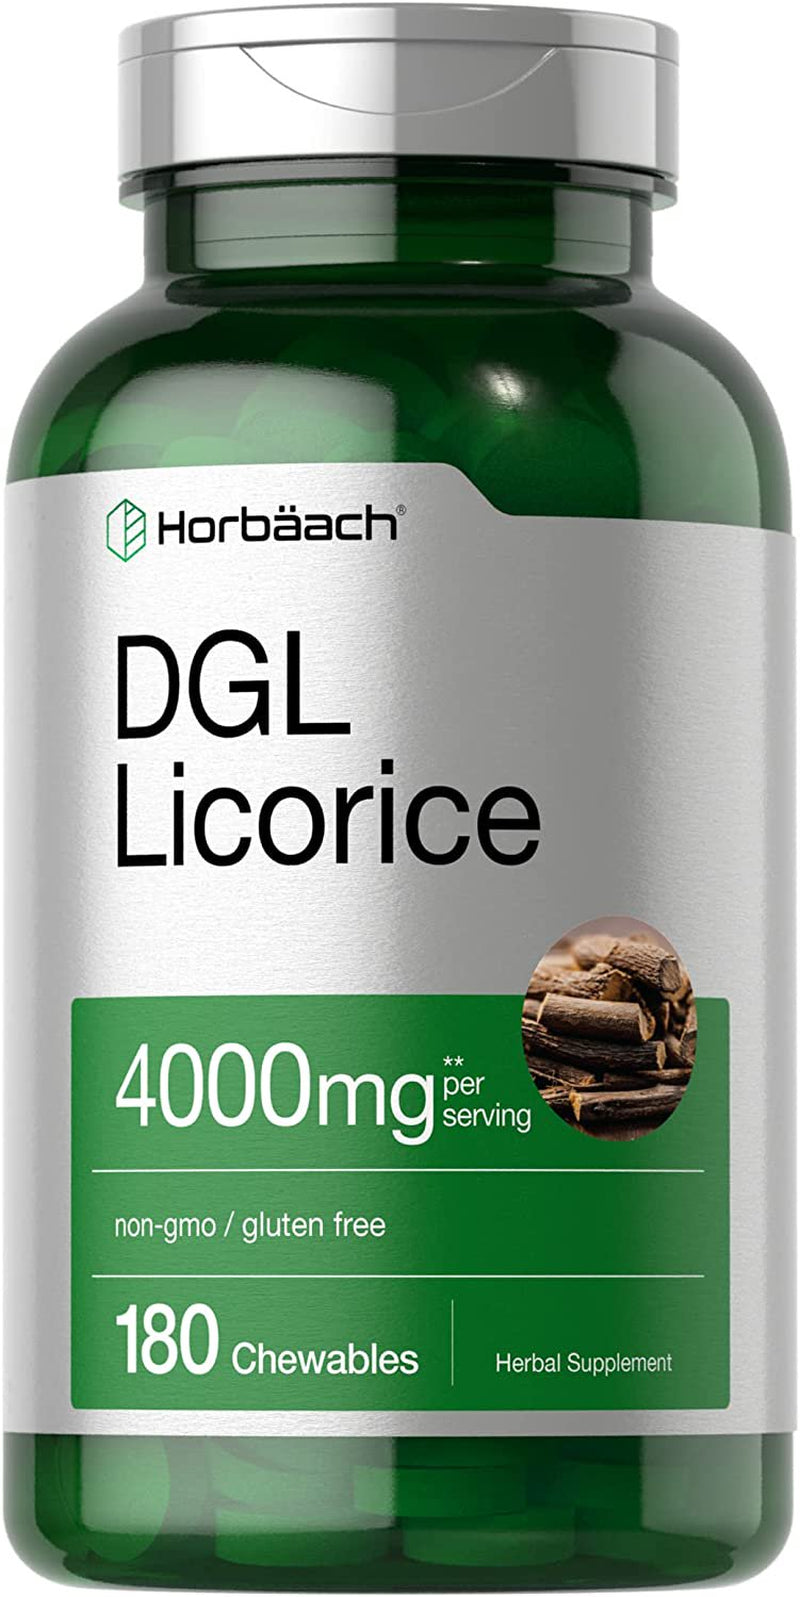 DGL Licorice Extract | 4000 Mg | 180 Chewable Tablets | Vegetarian | by Horbaach